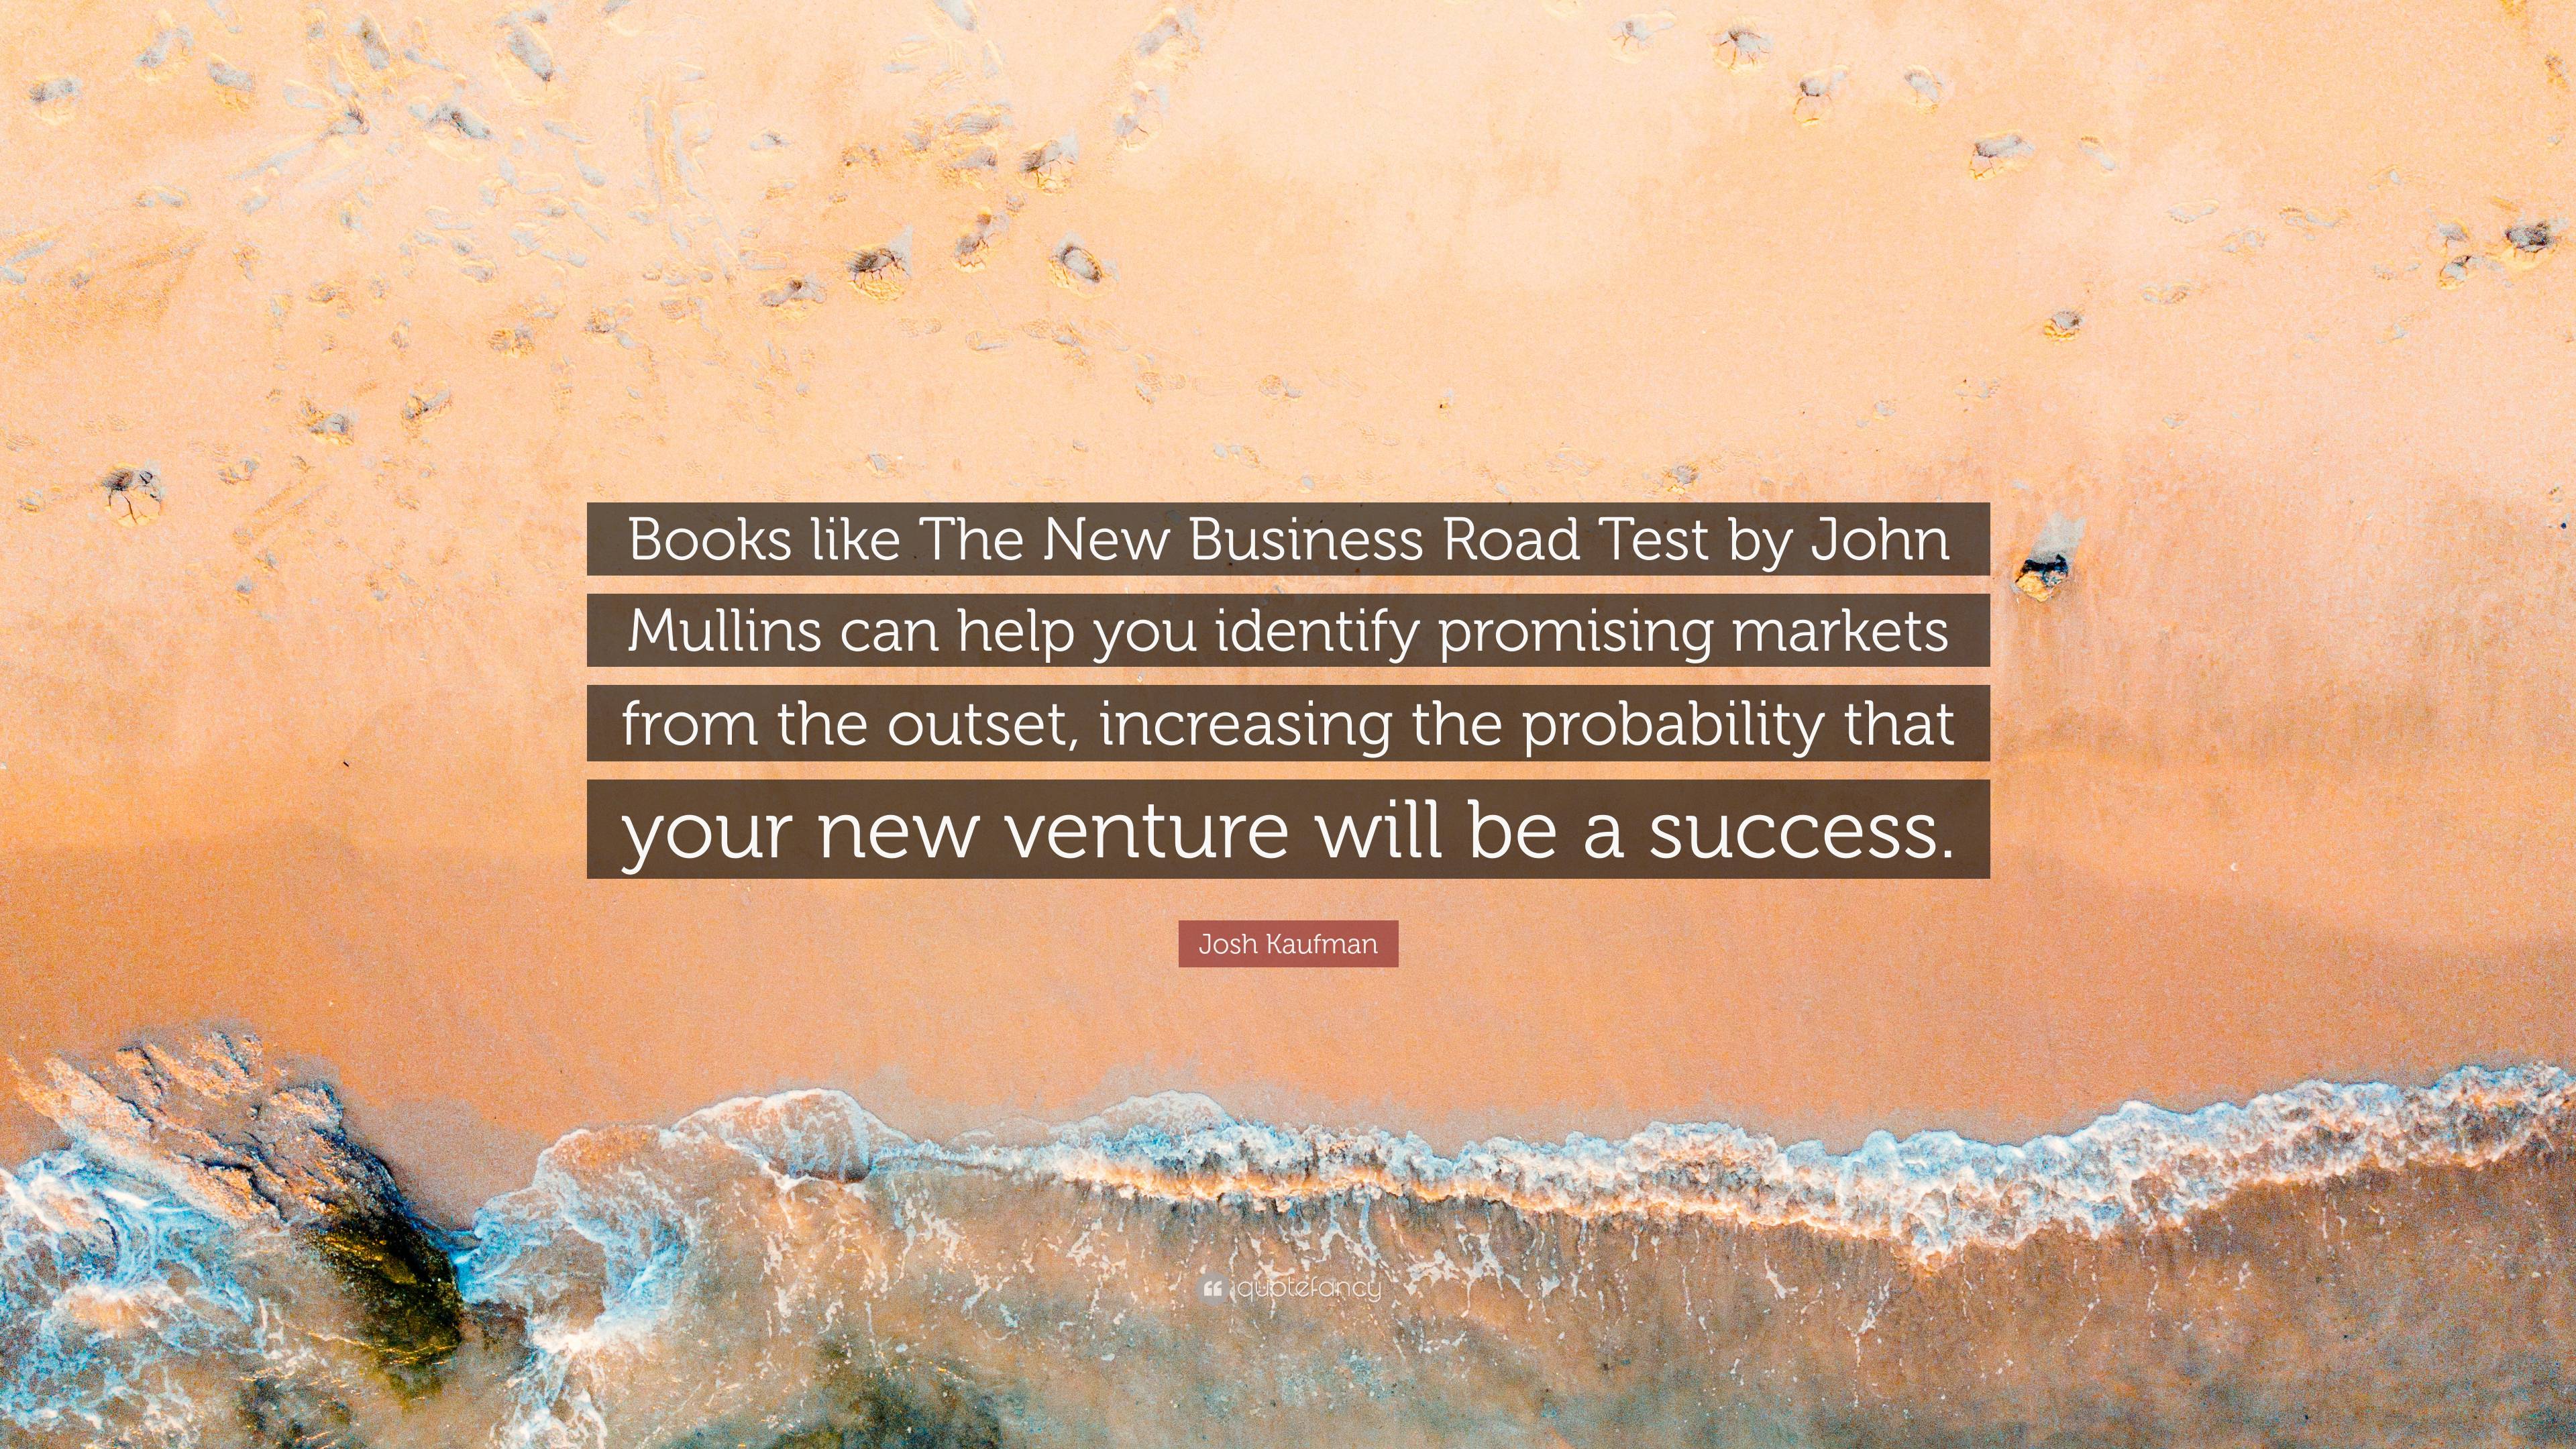 Josh Kaufman Quote: “Books like The New Business Road Test by John